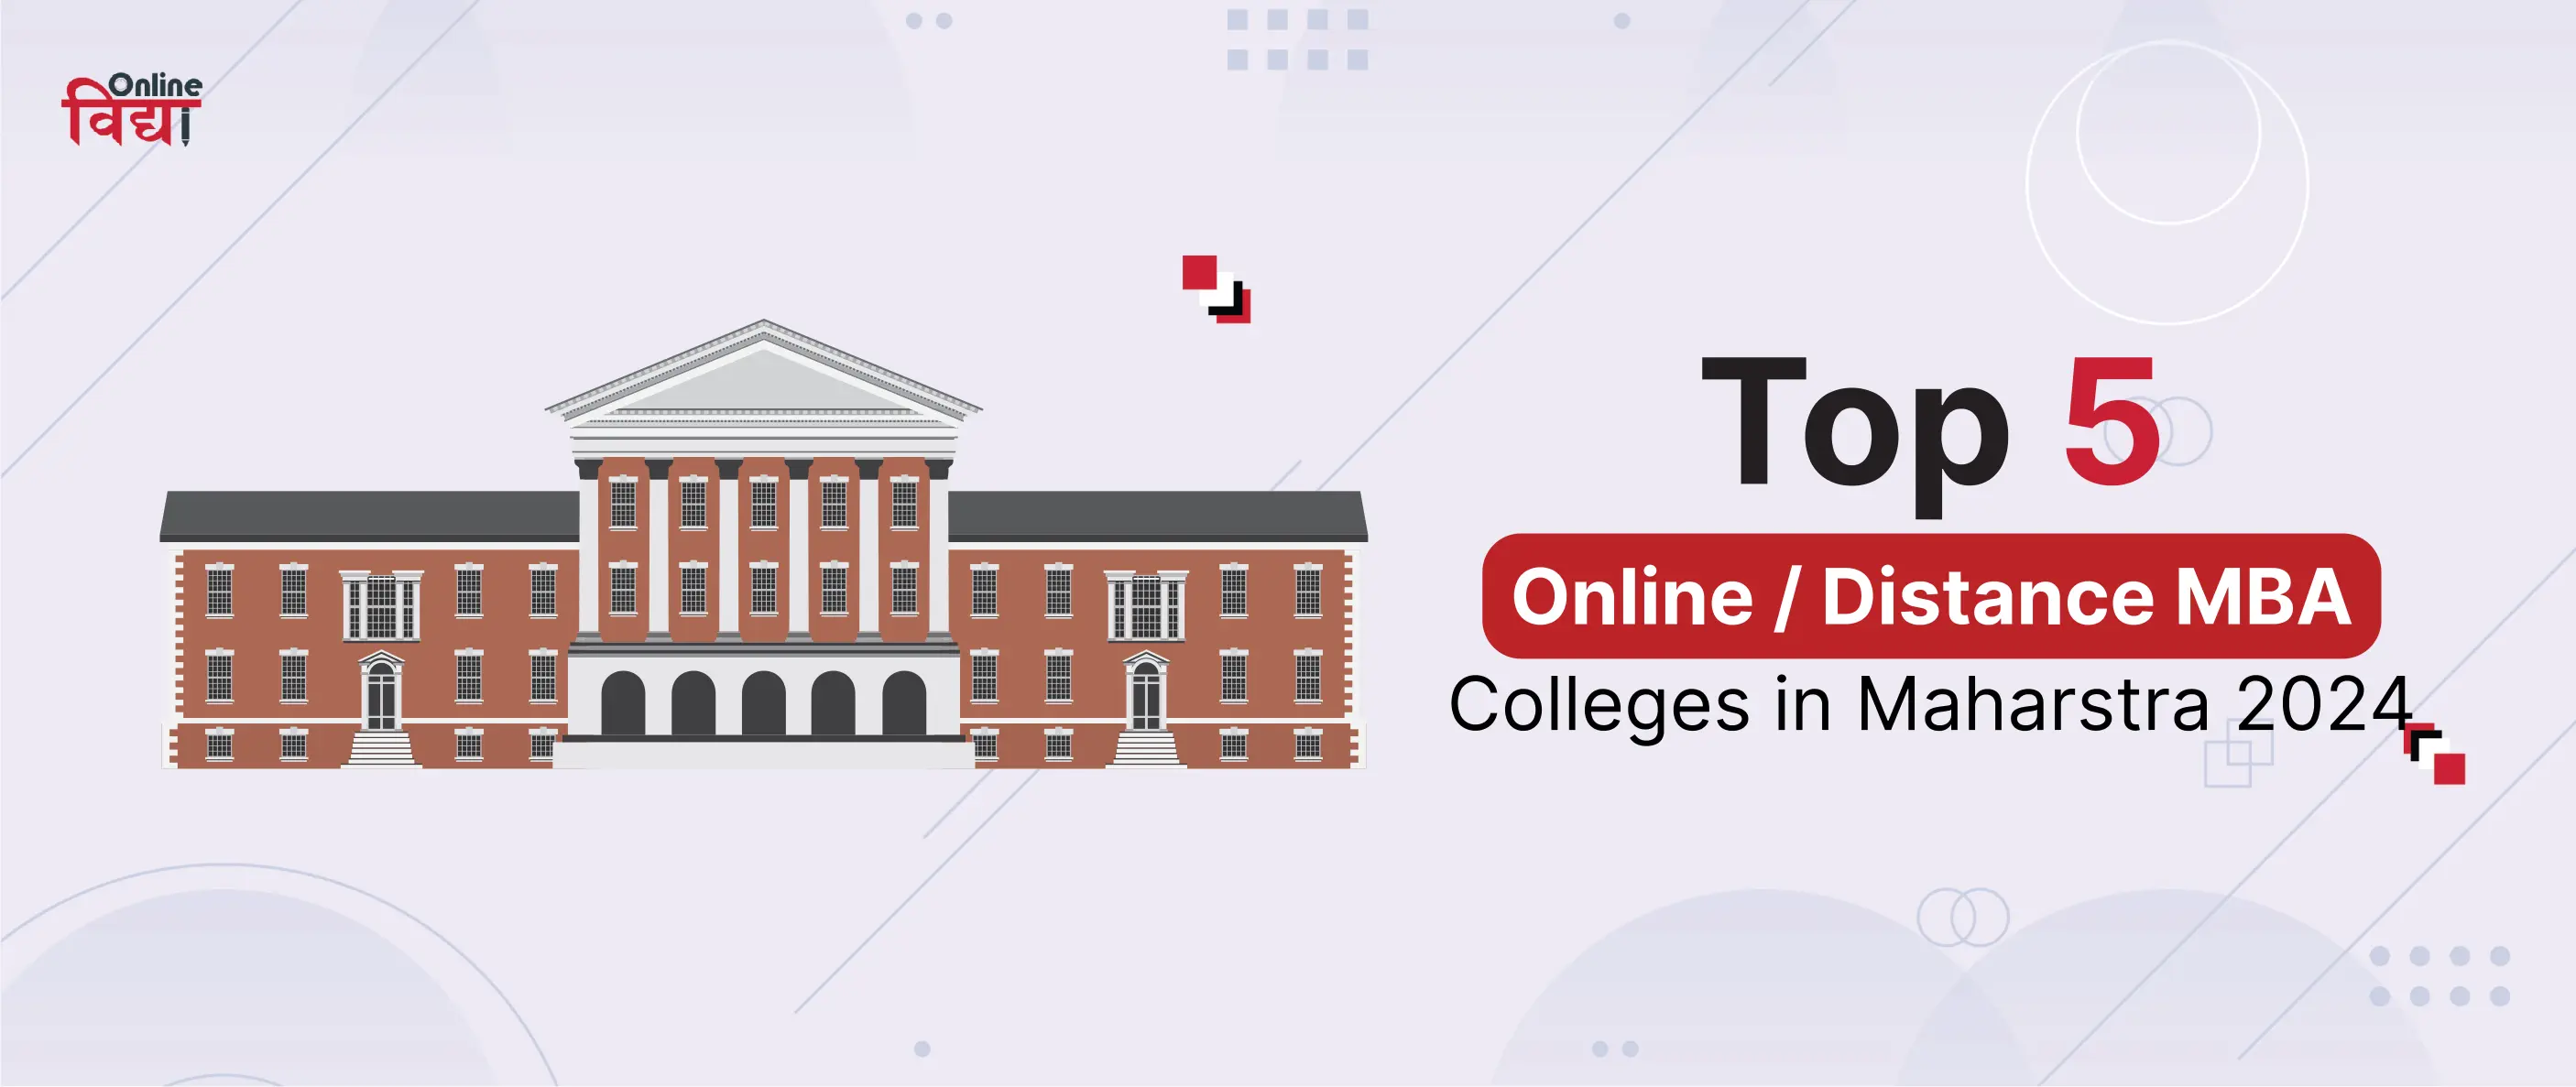 Top 5 Online/Distance MBA Colleges in Maharastra 2024